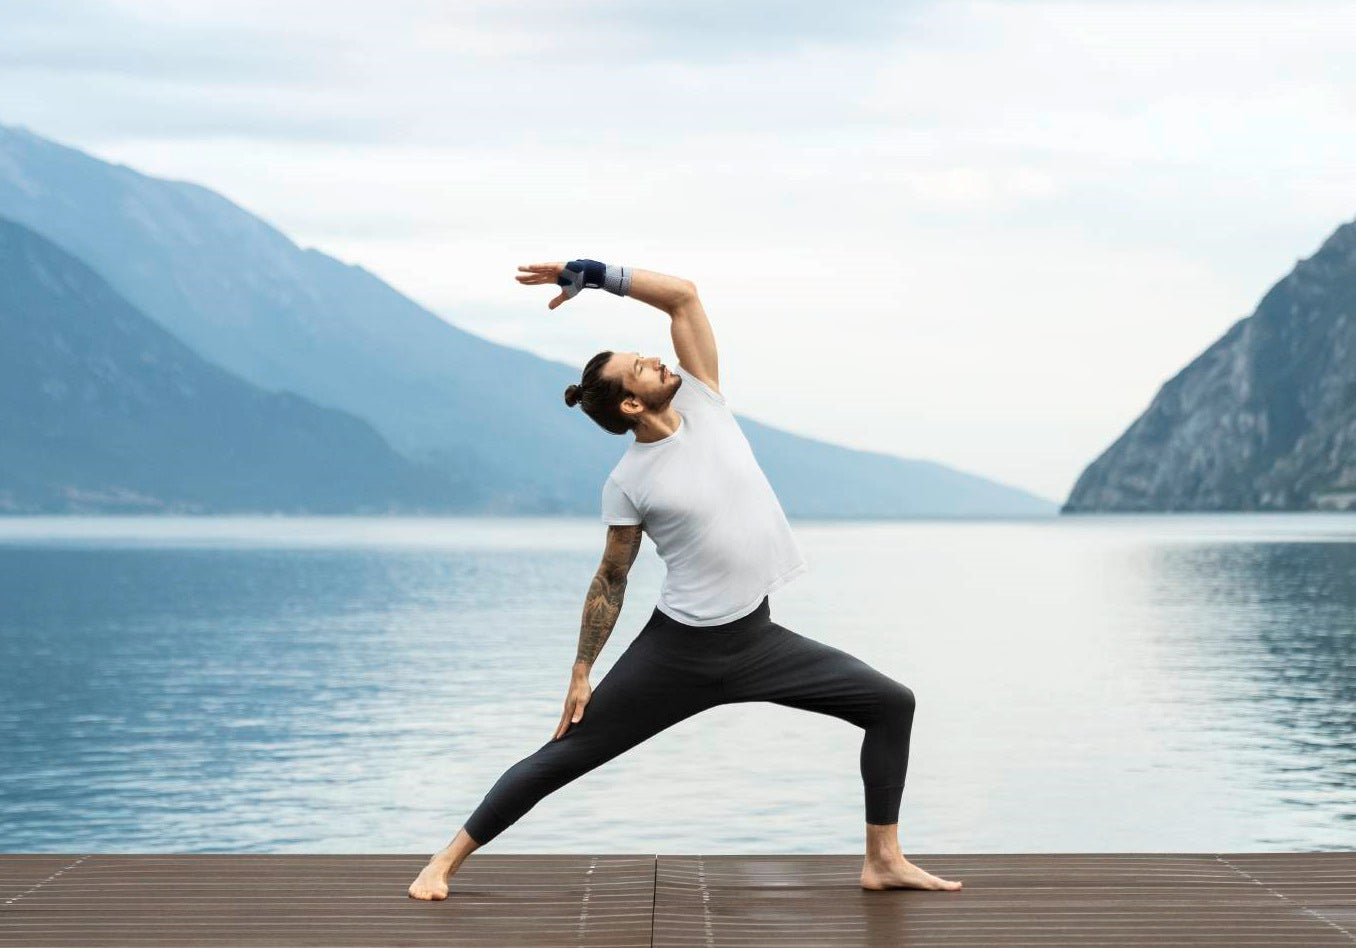 Man with a sprained wrist doing yoga in Bauerfeind's ManuTrain wrist brace. He's exercising on a wooden deck with a lake and mountains in the background